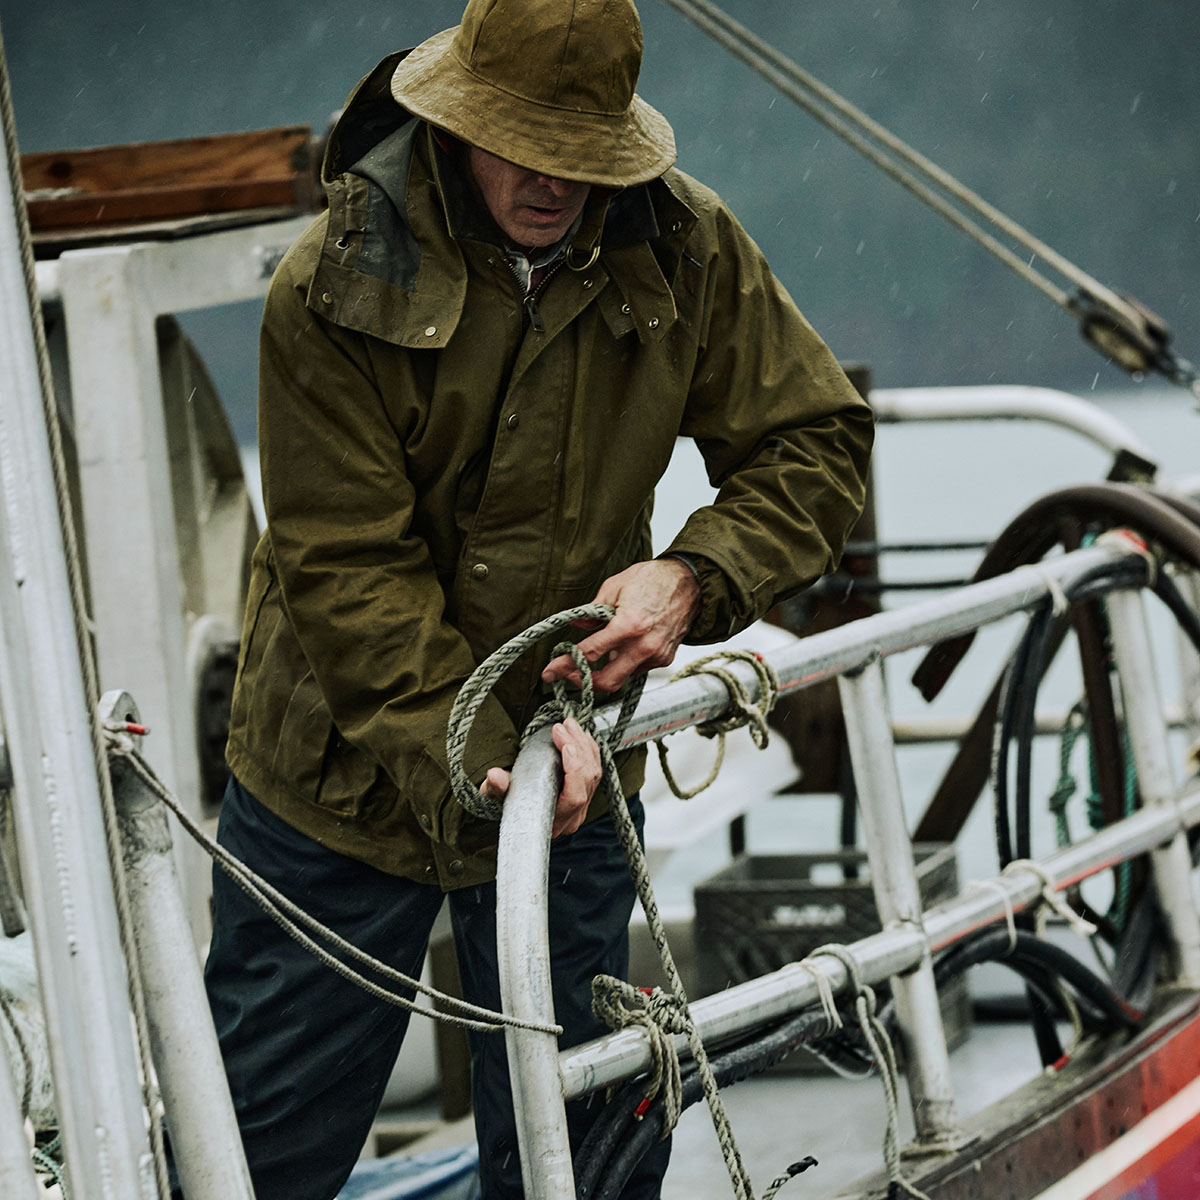 Filson Foul Weather Jacket Dark Tan, a classic waxed-cotton raincoat with improved fit and sturdy fabric